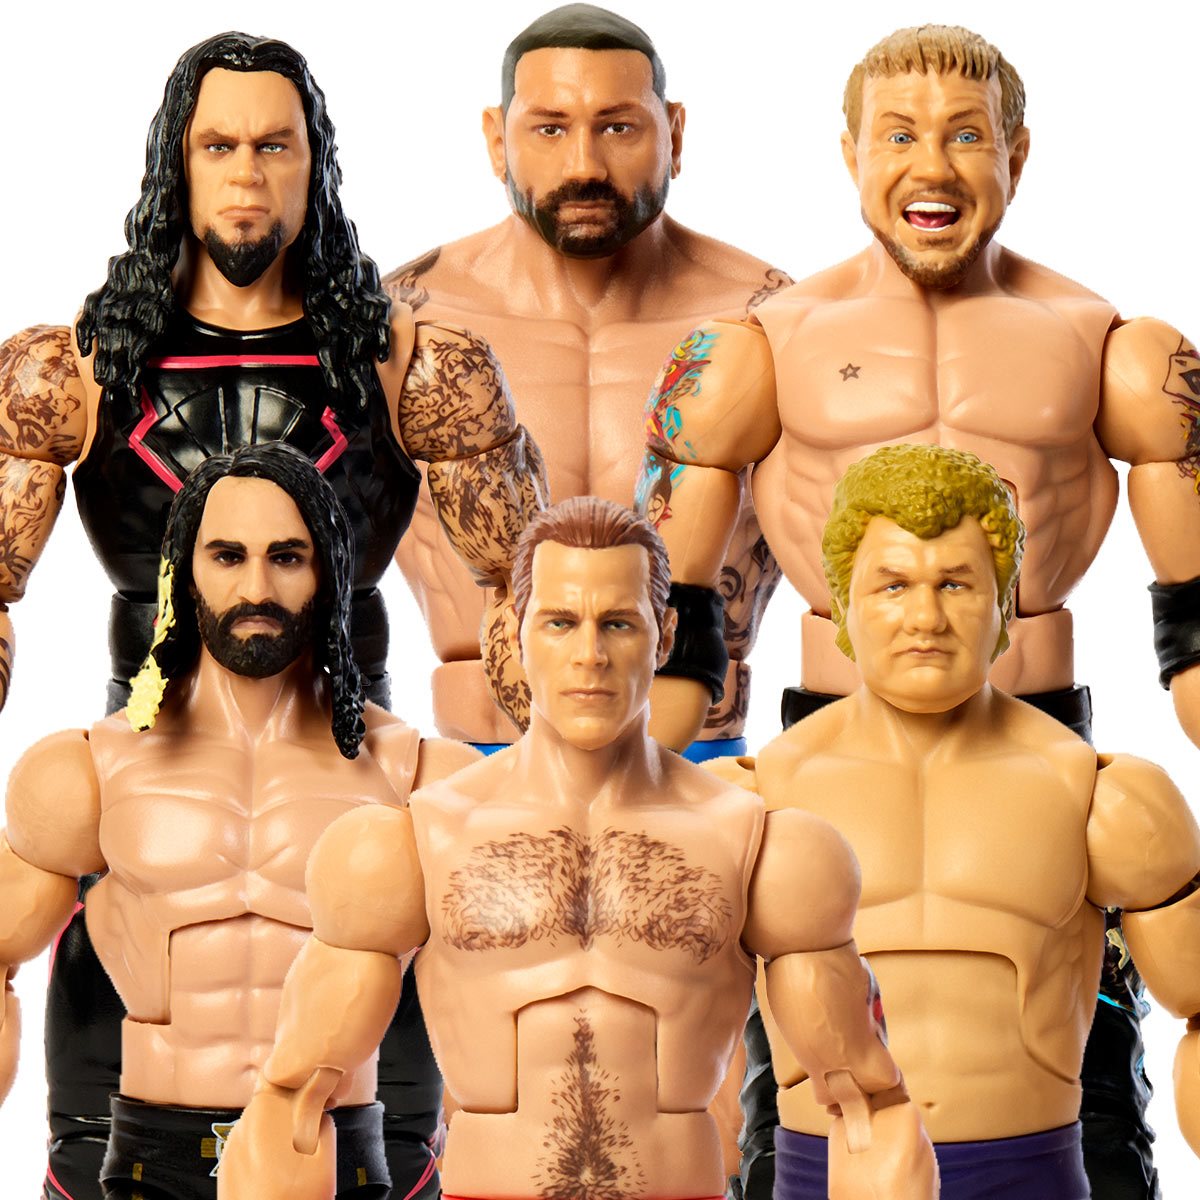 WWE Elite Collection Greatest Hits Set of 6 Figures